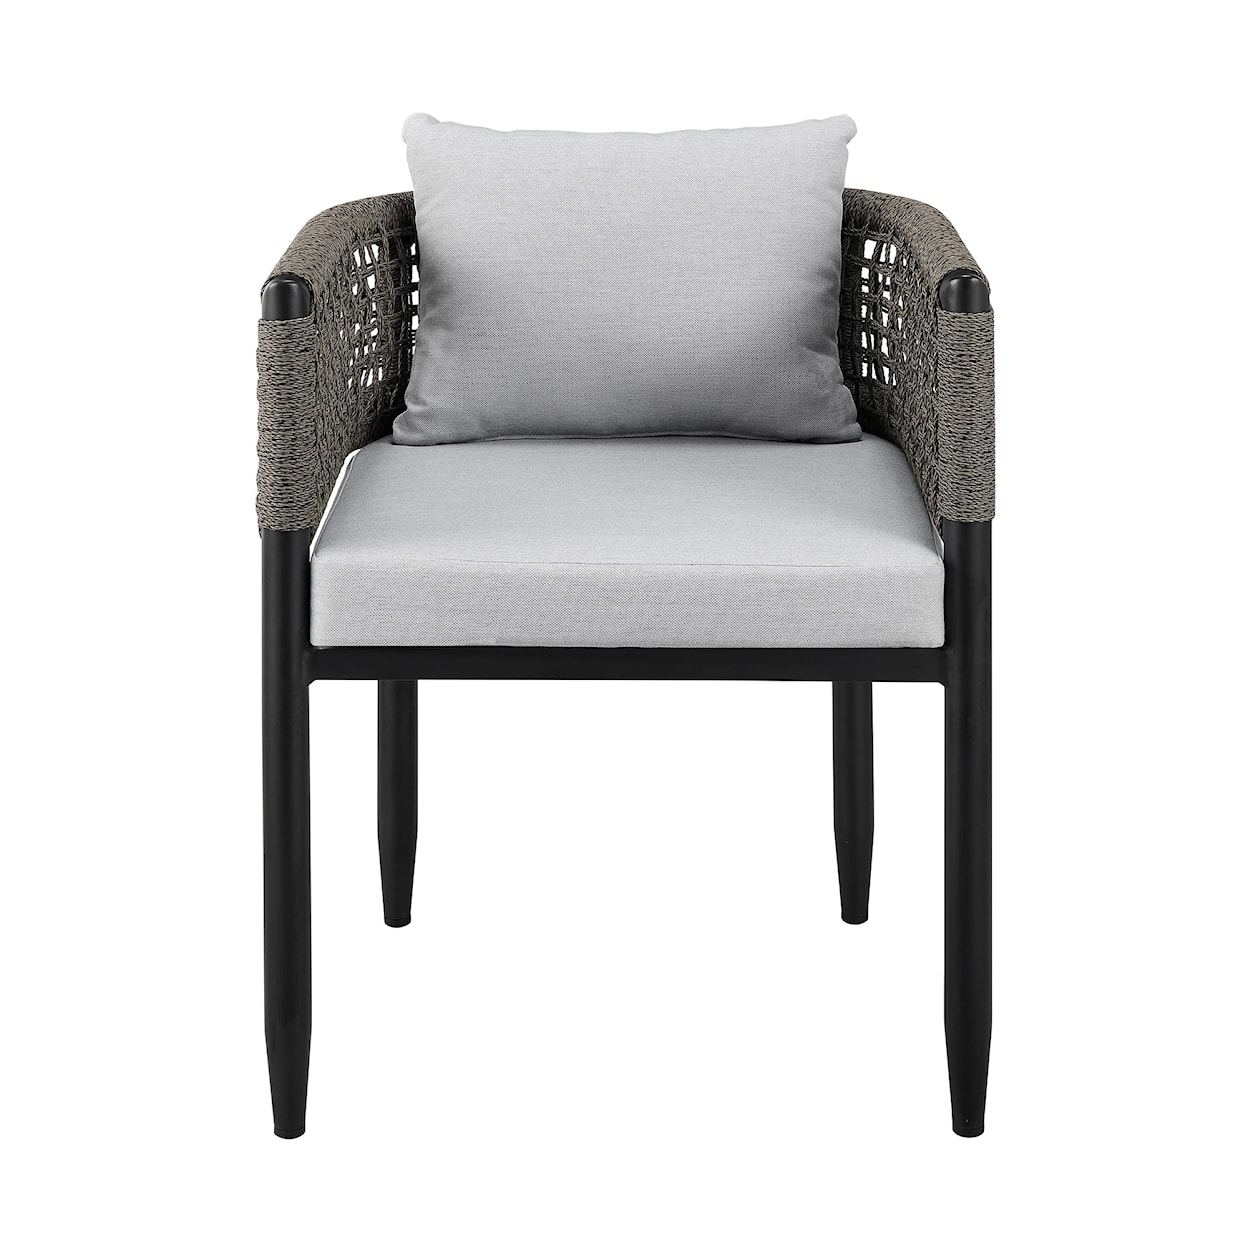 Armen Living Felicia Set of 2 Outdoor Dining Chairs